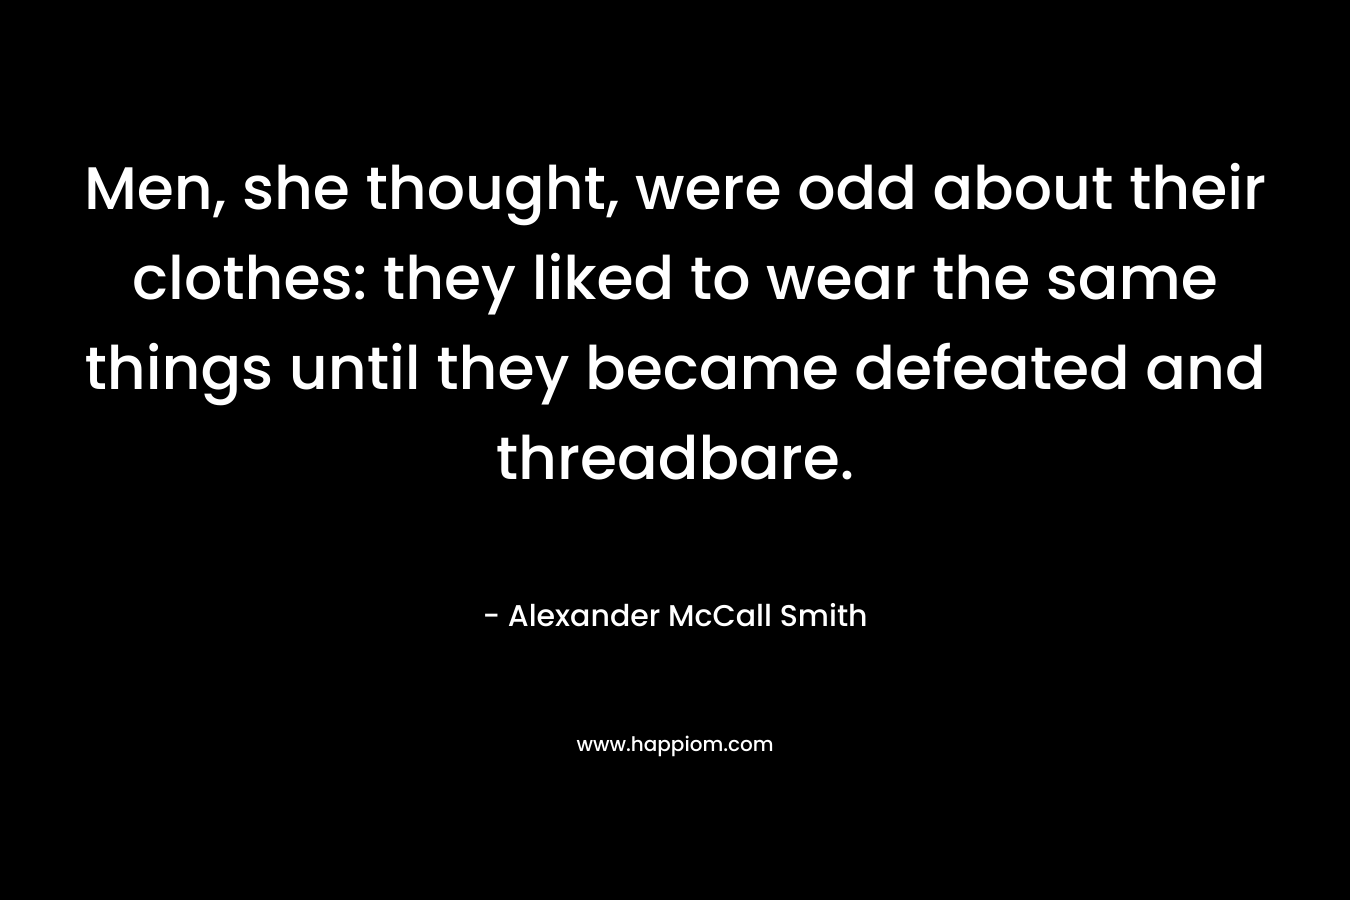 Men, she thought, were odd about their clothes: they liked to wear the same things until they became defeated and threadbare. – Alexander McCall Smith